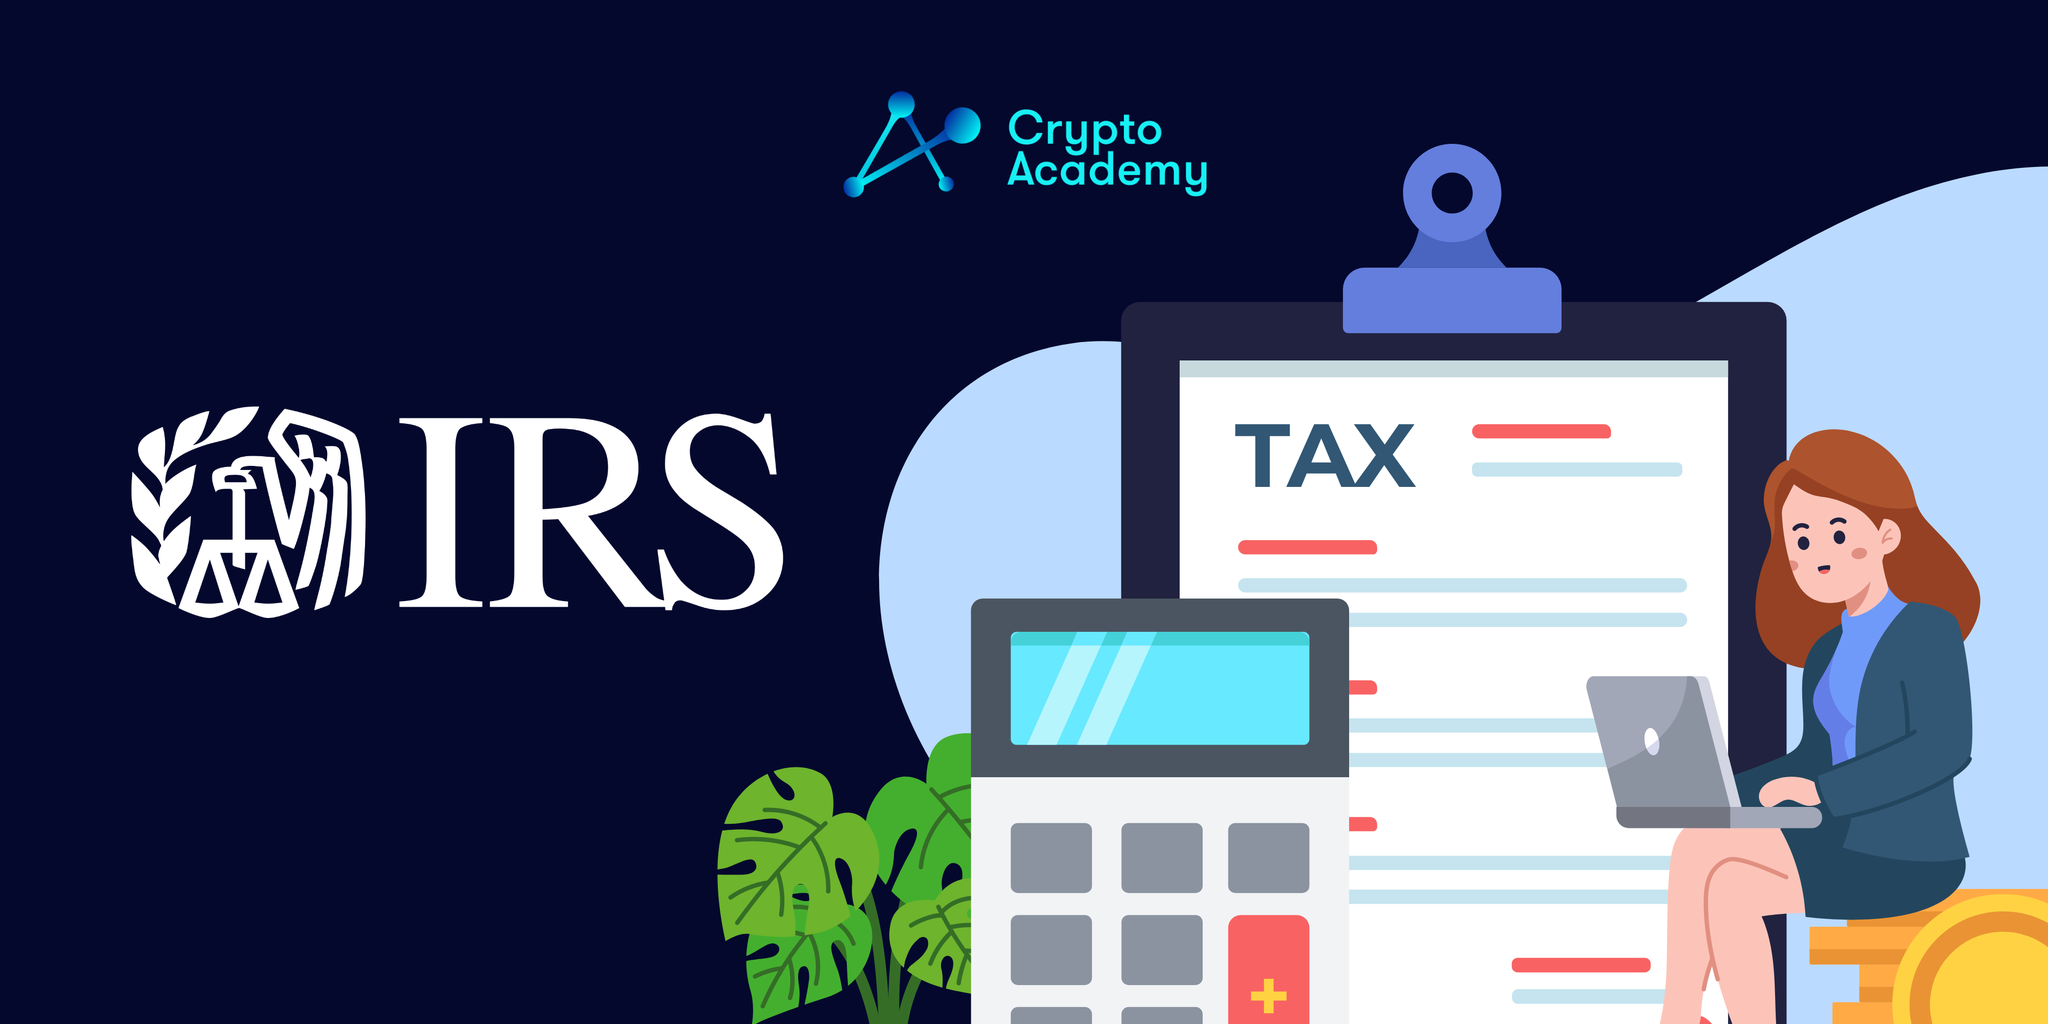 IRS Commissioner: Crypto Tax Enforcement Takes Precedence